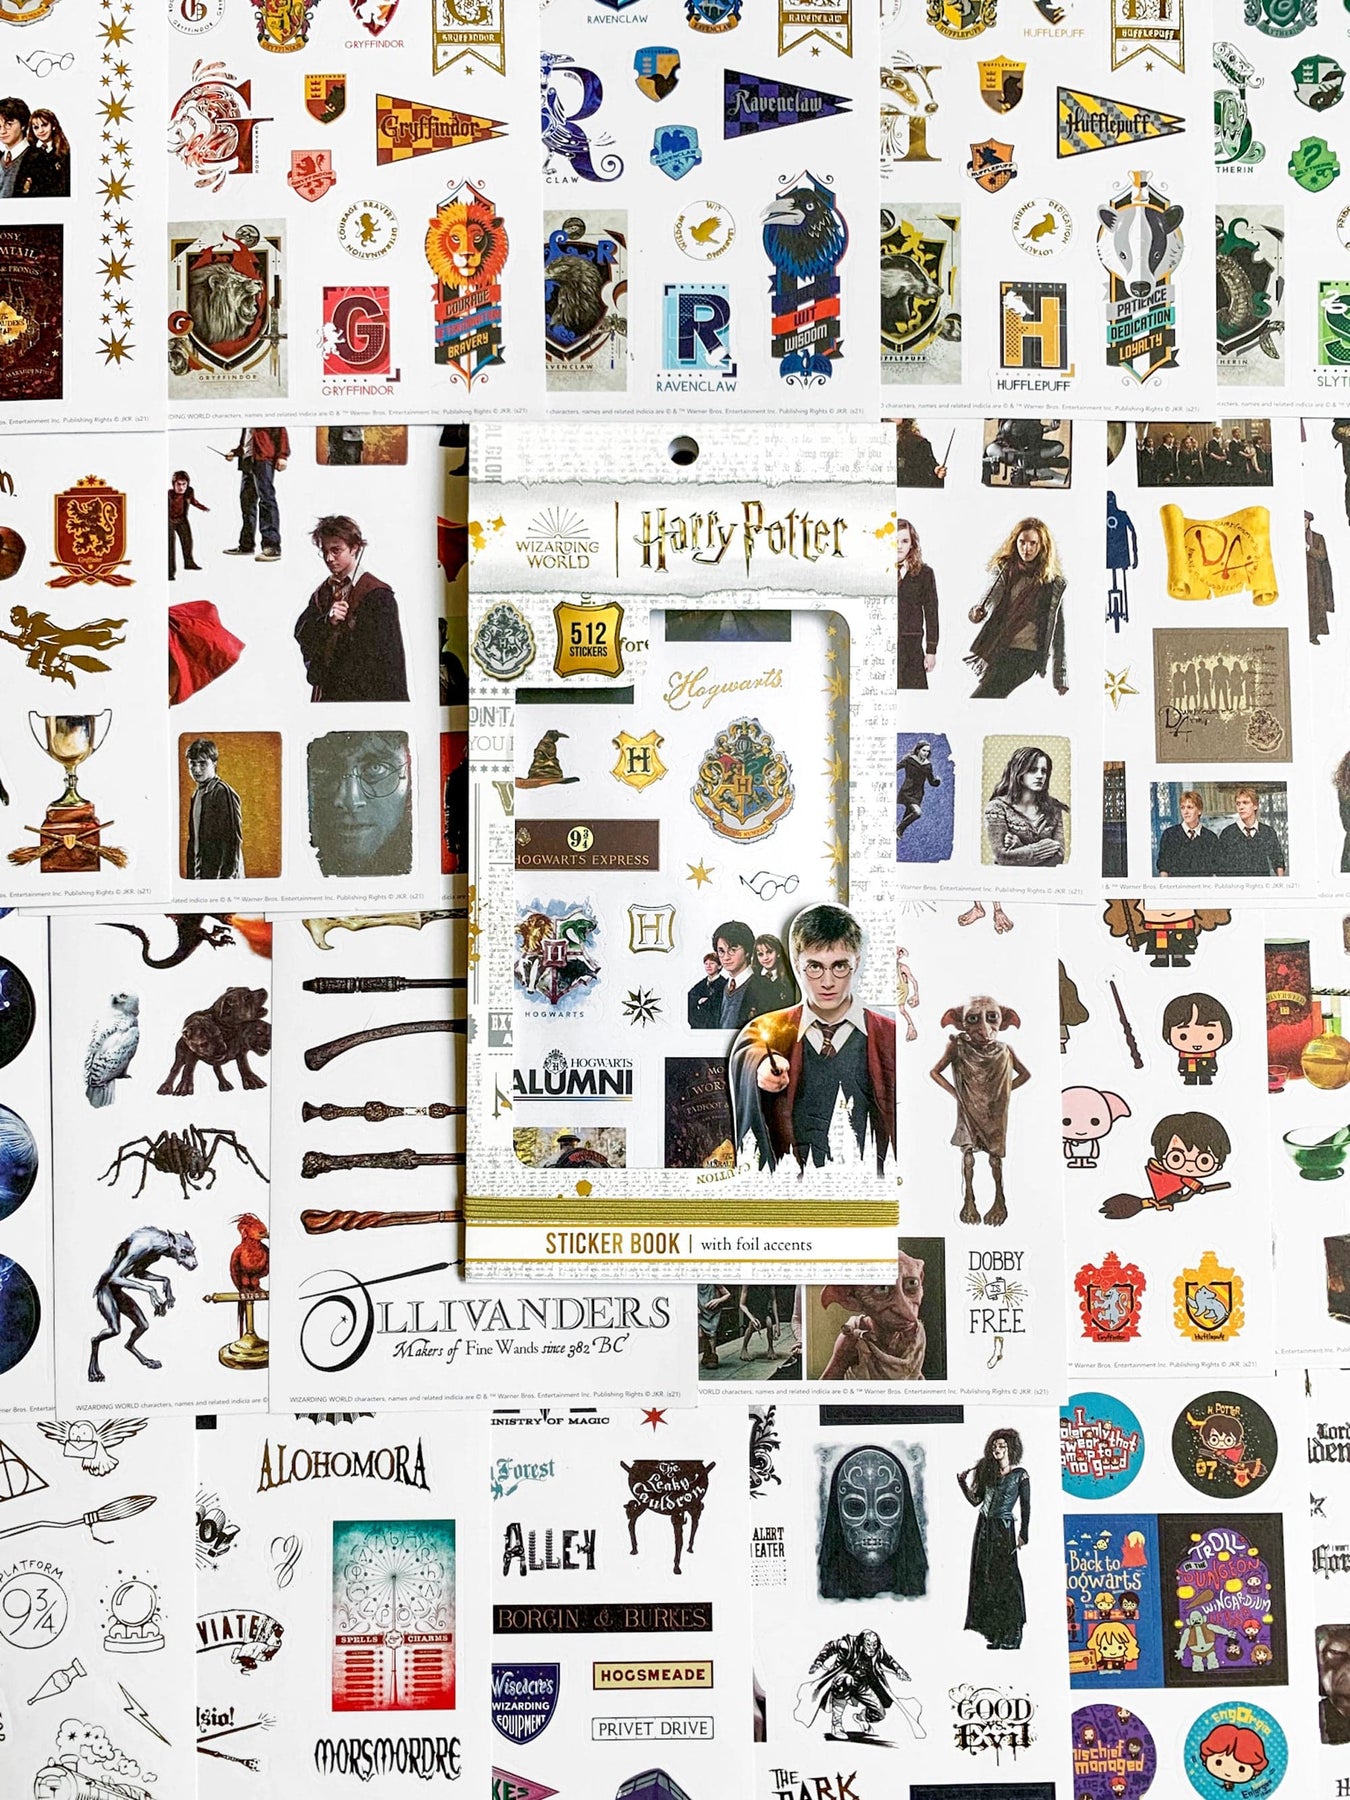  Inkworks Harry Potter Journal And Pen Bundle SetPremium  Harry Potter Diary Notebook, Ballpoint Pens, And Harry Potter Stickers